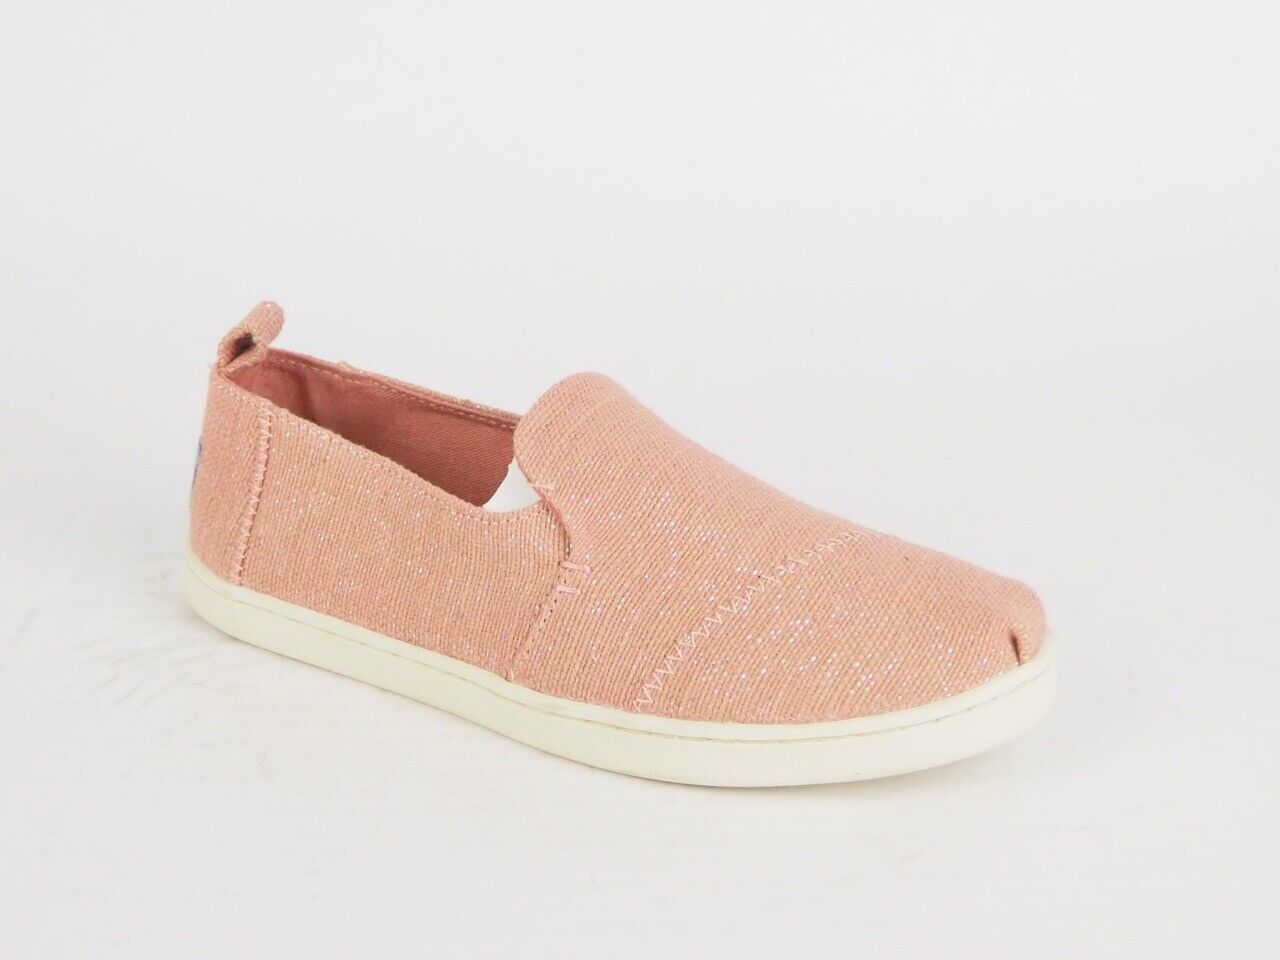 Womens Toms Deconstructed Alpargata Bloom Textile Flats Slip On Trainers Uk 3 - London Top Style